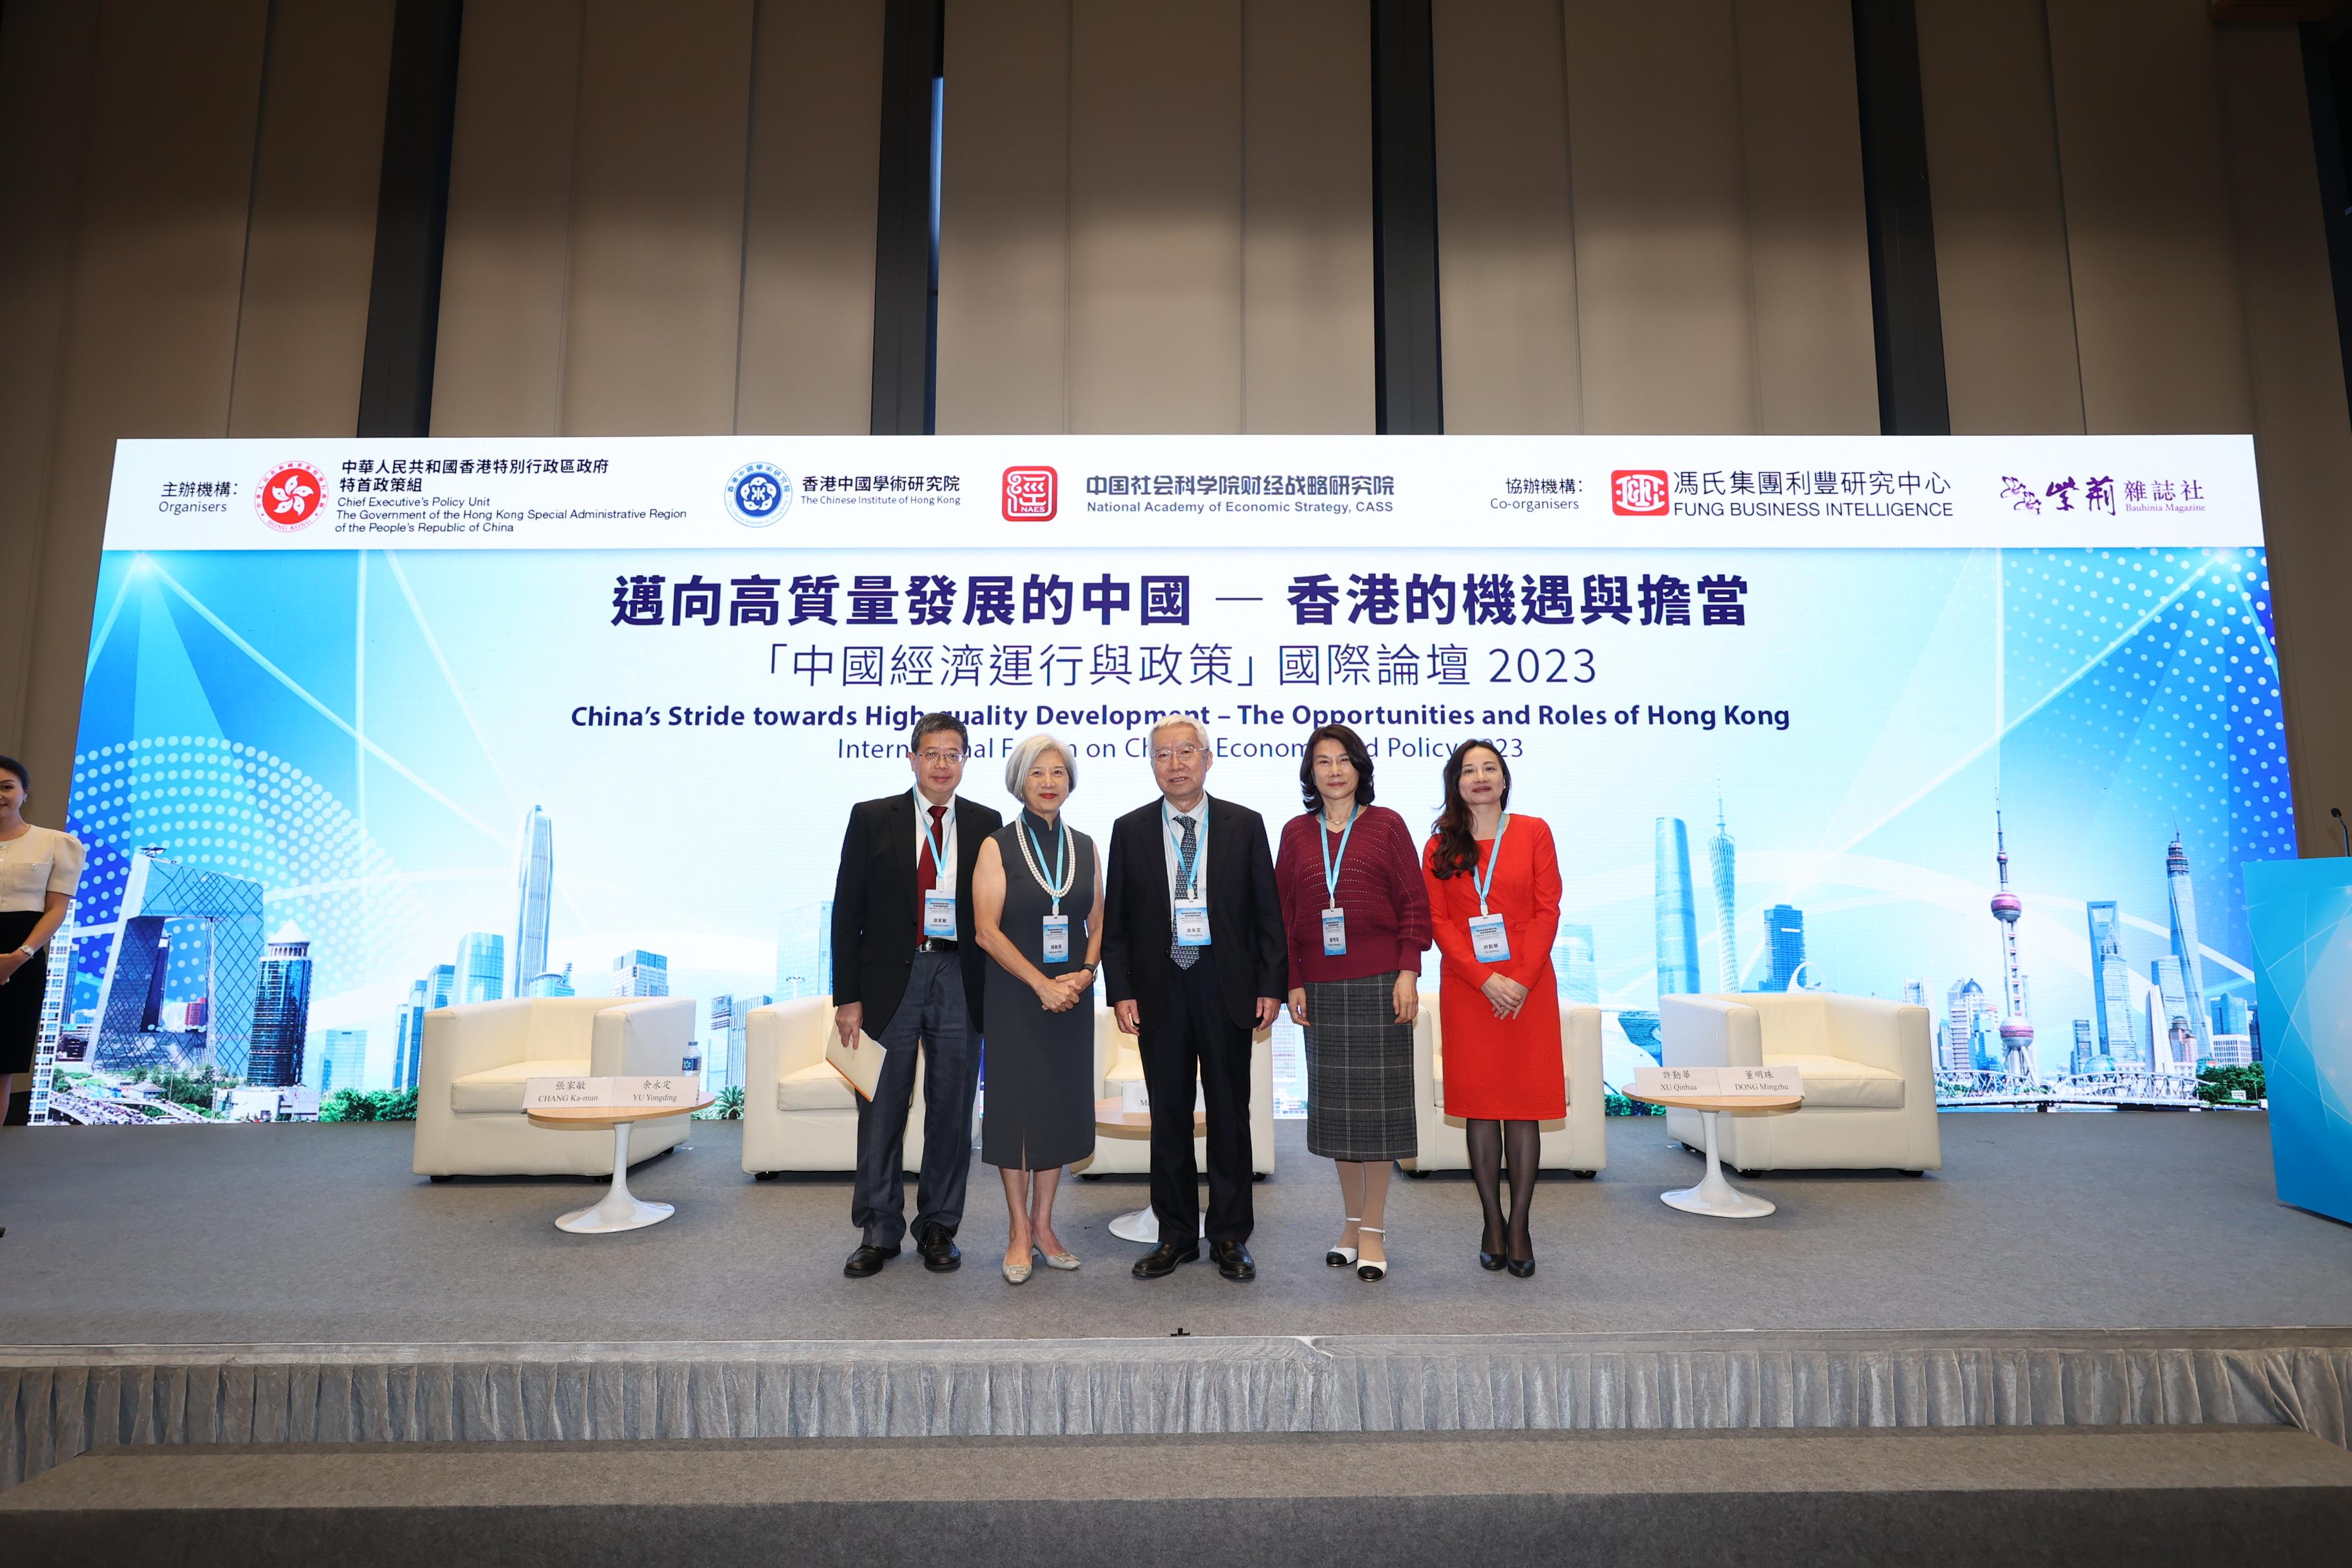 
China's Stride towards High-quality Development - The Opportunities and Roles of Hong Kong International Forum on China’s Economy and Policy 2023 was held at the Central Government Offices today (November 15). Photo shows the speakers of session III.